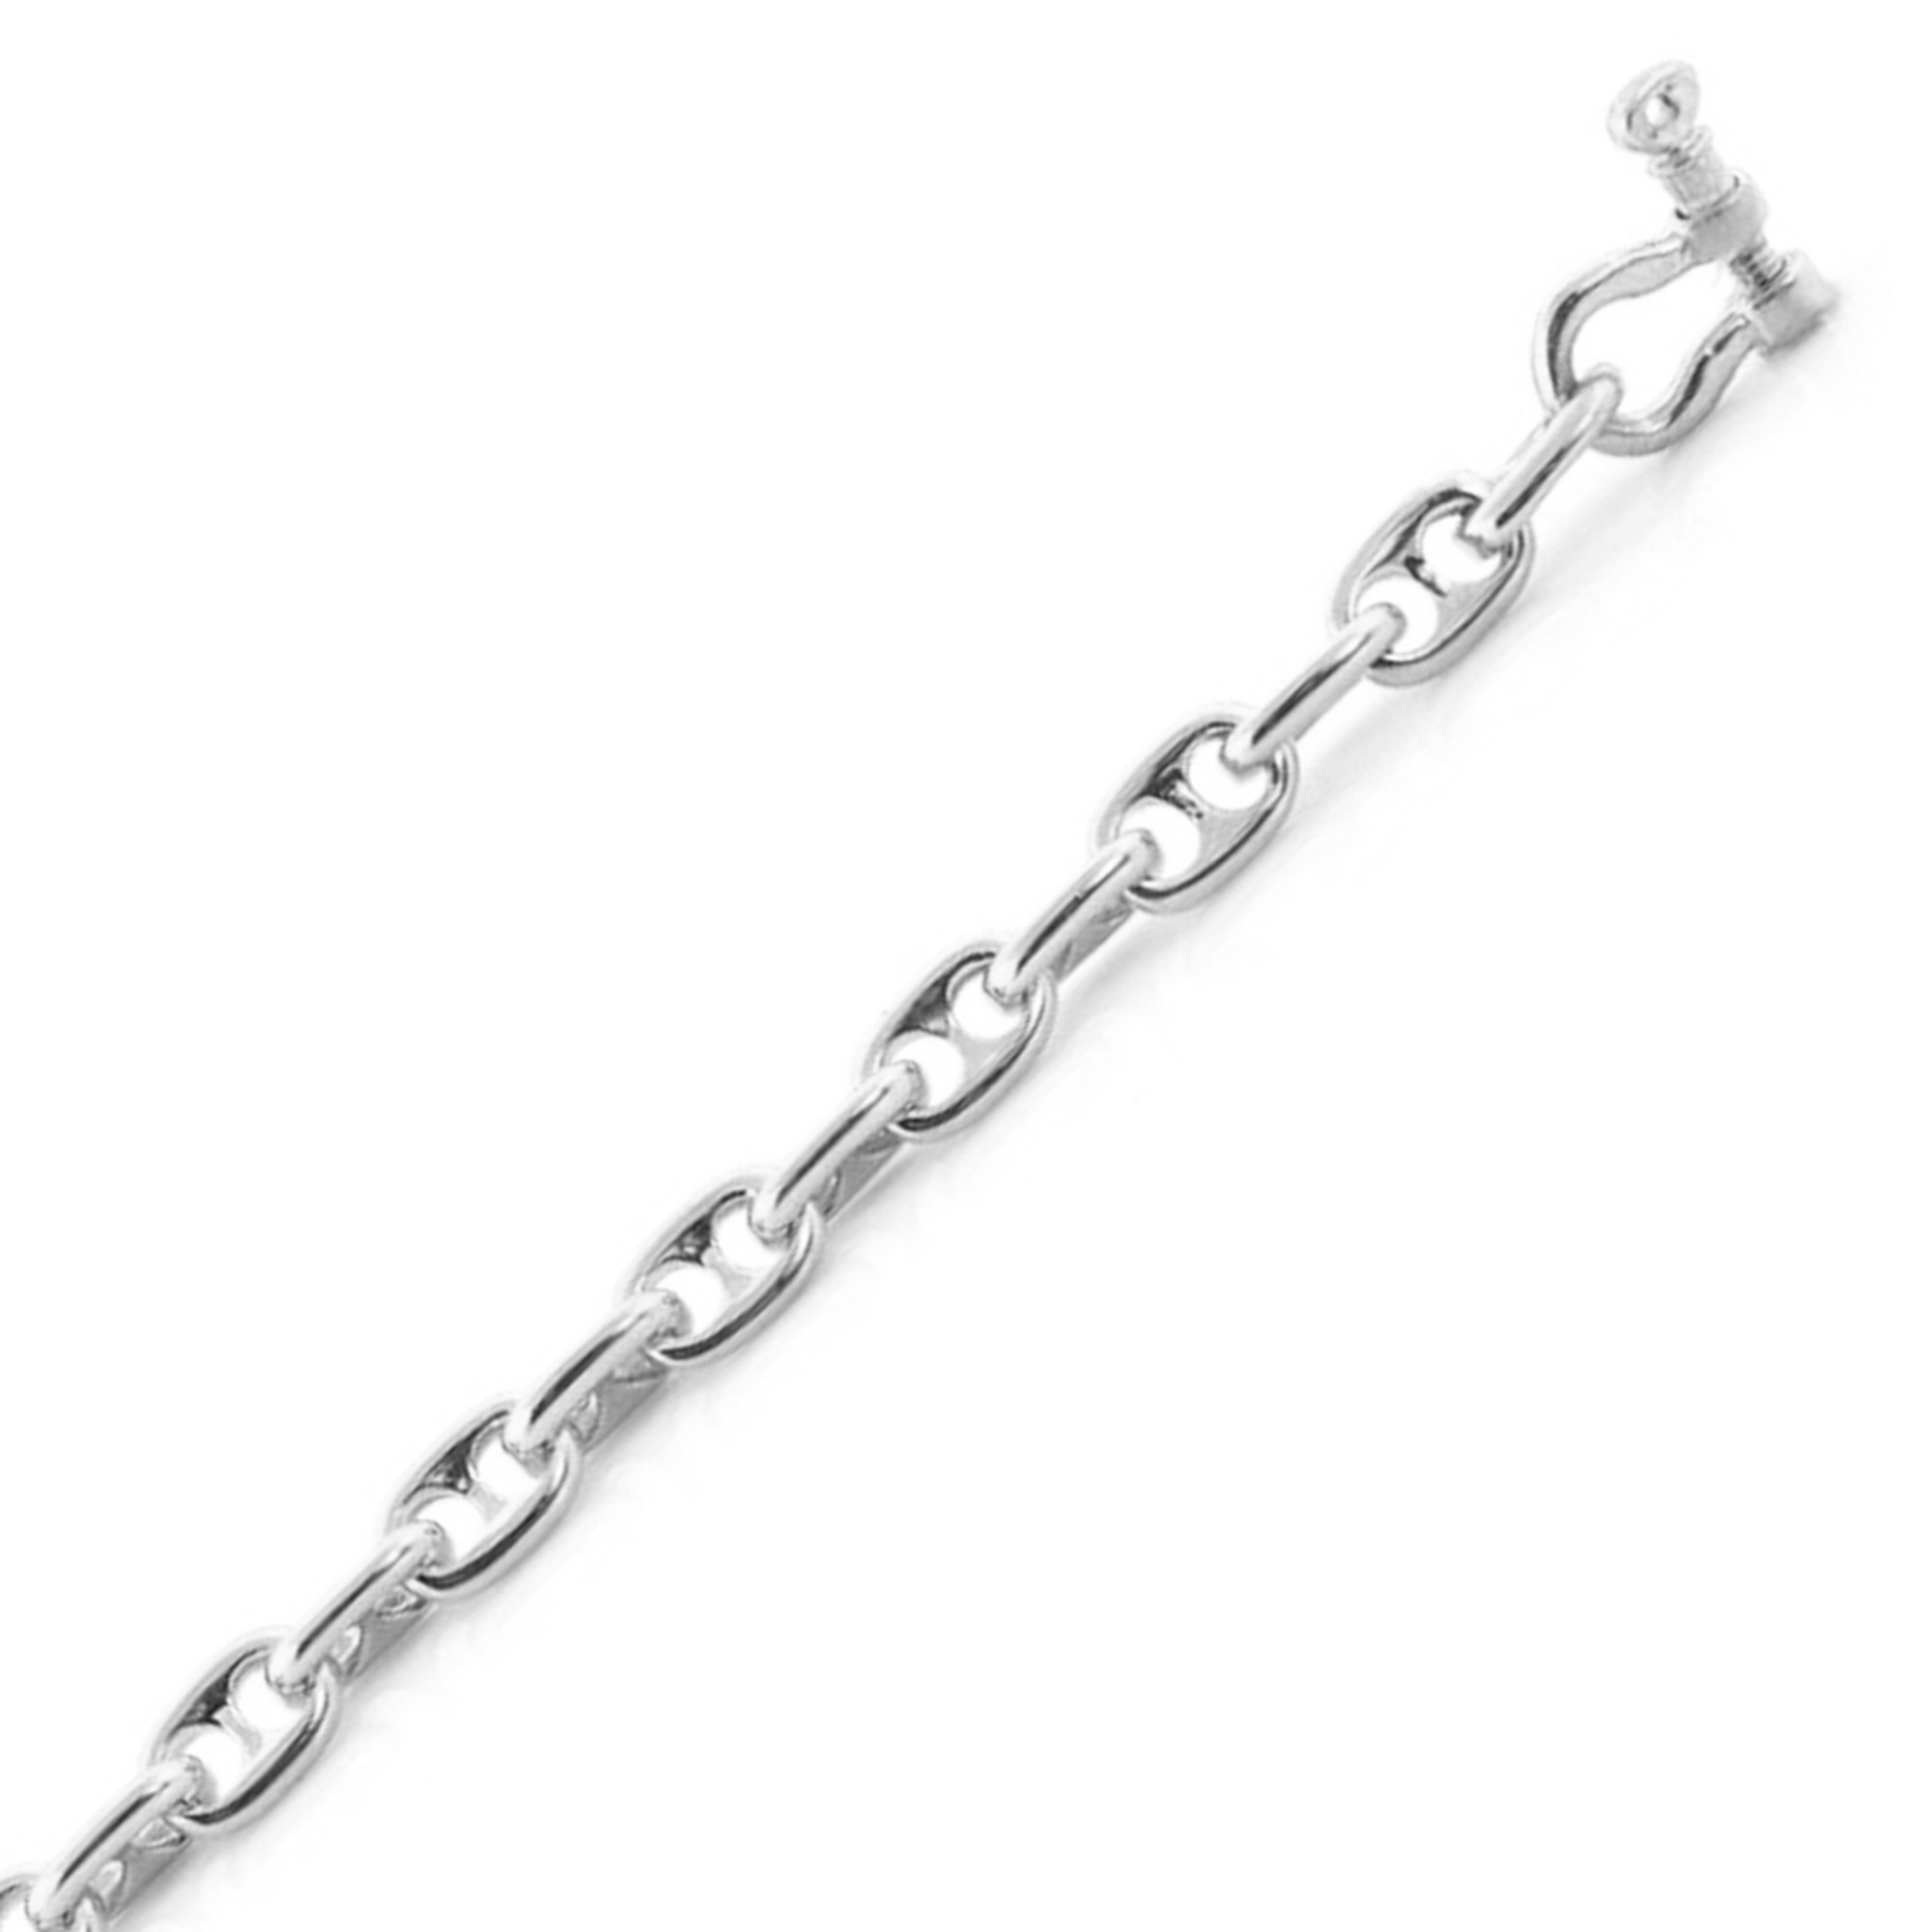 Get the Perfect 18k White Gold Chains